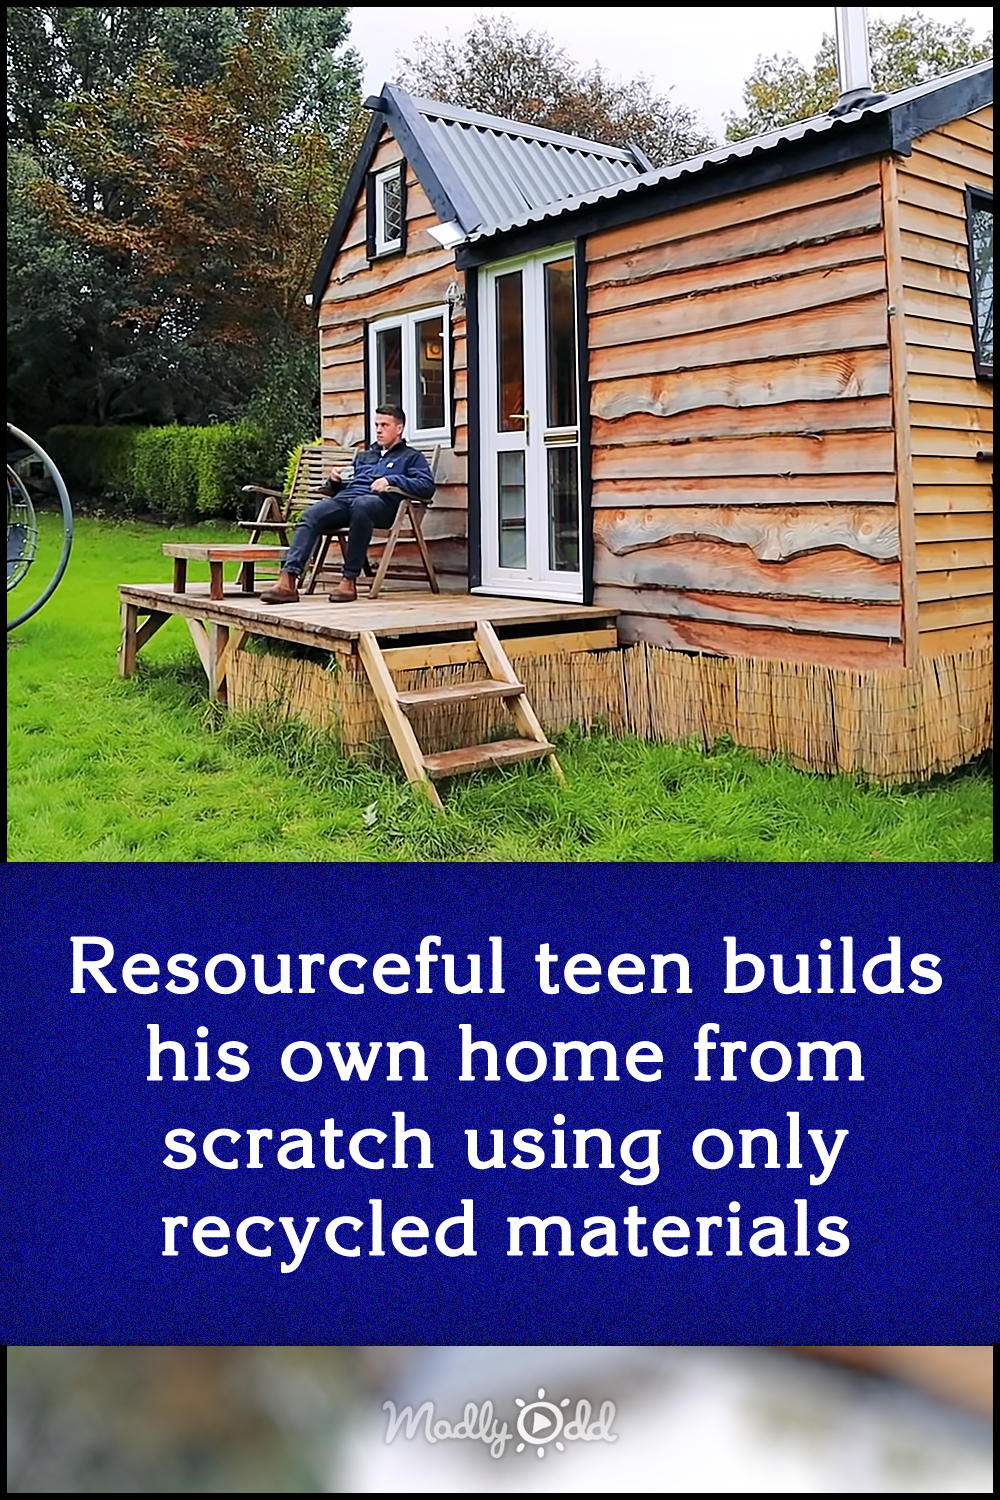 Resourceful teen builds his own home from scratch using only recycled materials